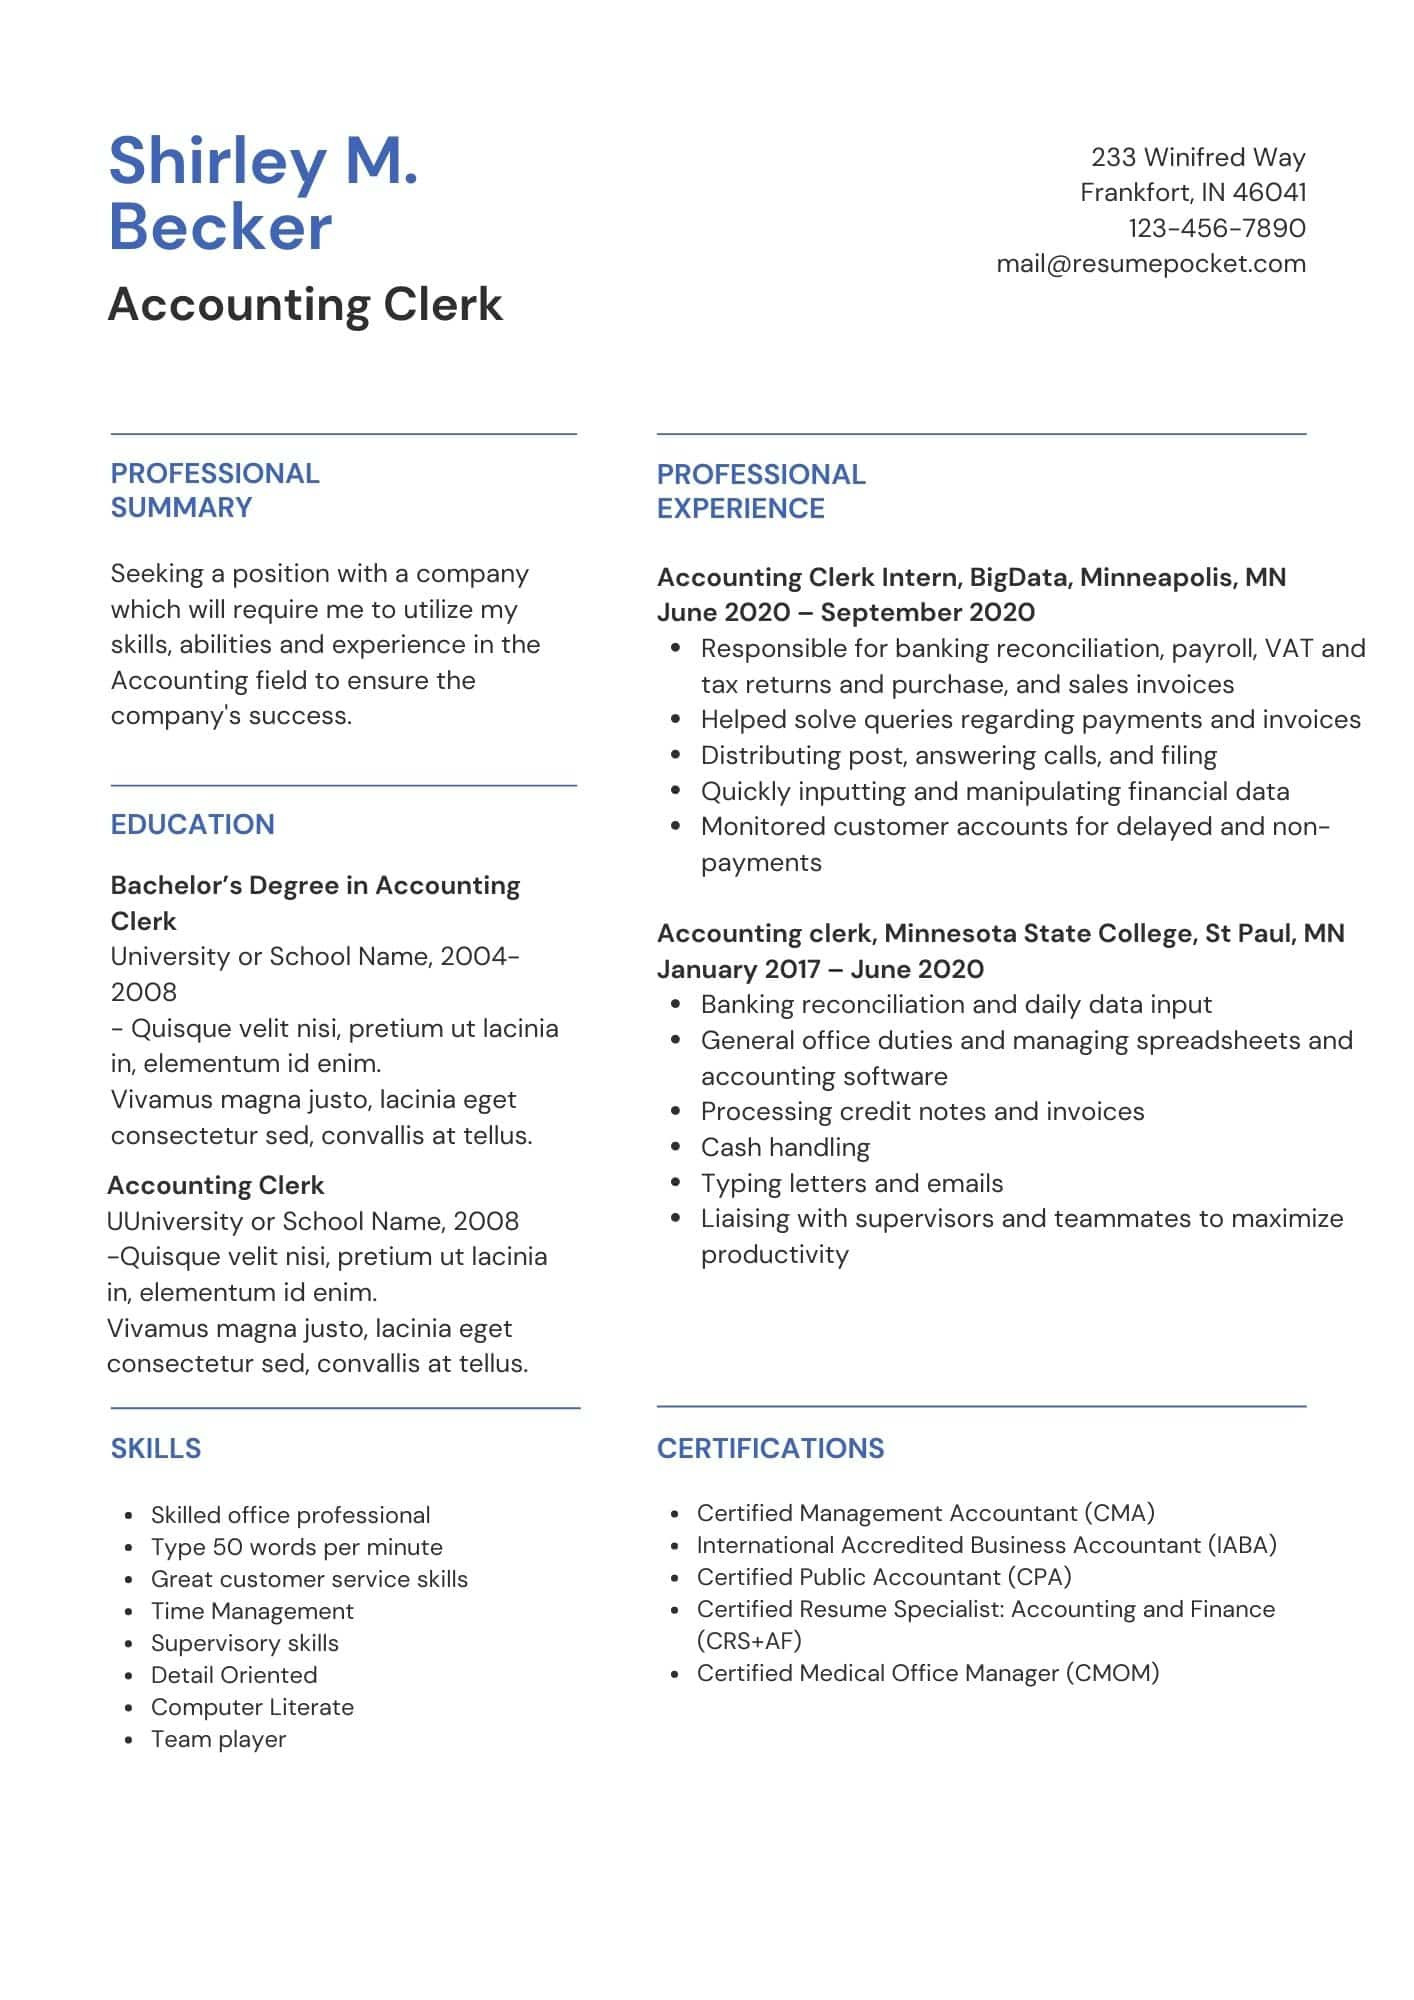 Sample Resume for Accounting Clerk No Experience Accounting Clerk Resume Sample and Template – Resumepocket